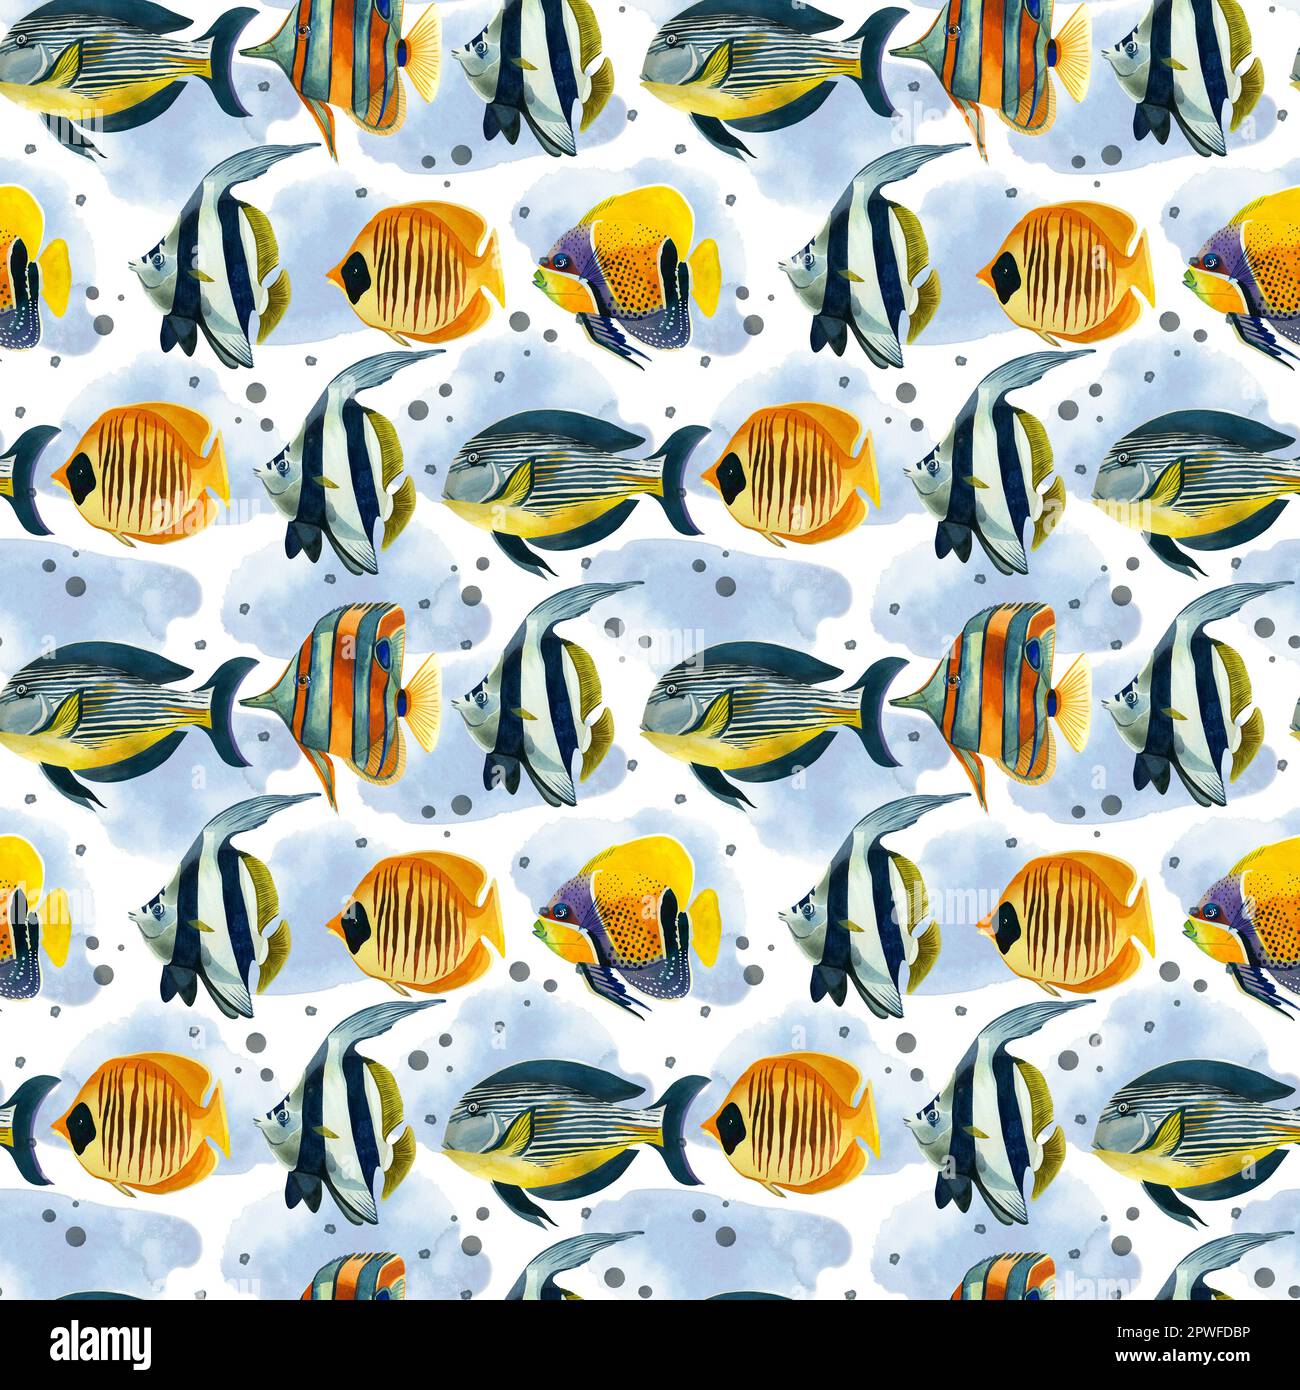 Seamless pattern. Tropical fishes of bright colors, pink stars, corals and blue spots, hand-drawn in watercolor on a white background. Stock Photo